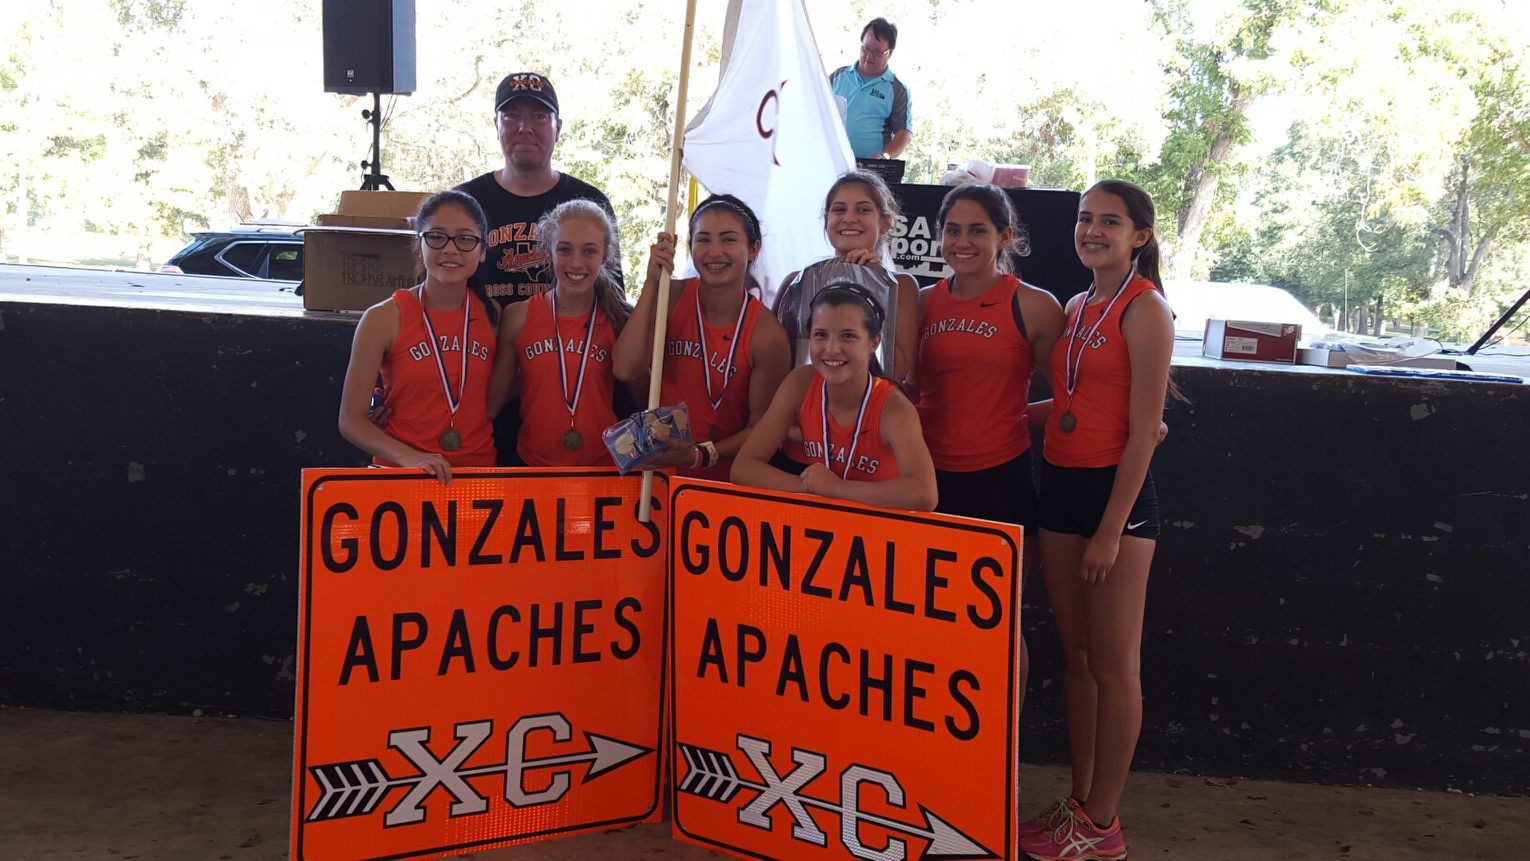 The Lady Apaches took down their opponents on Monday, winning District 27-4A and advancing to the regional meet as district champ.